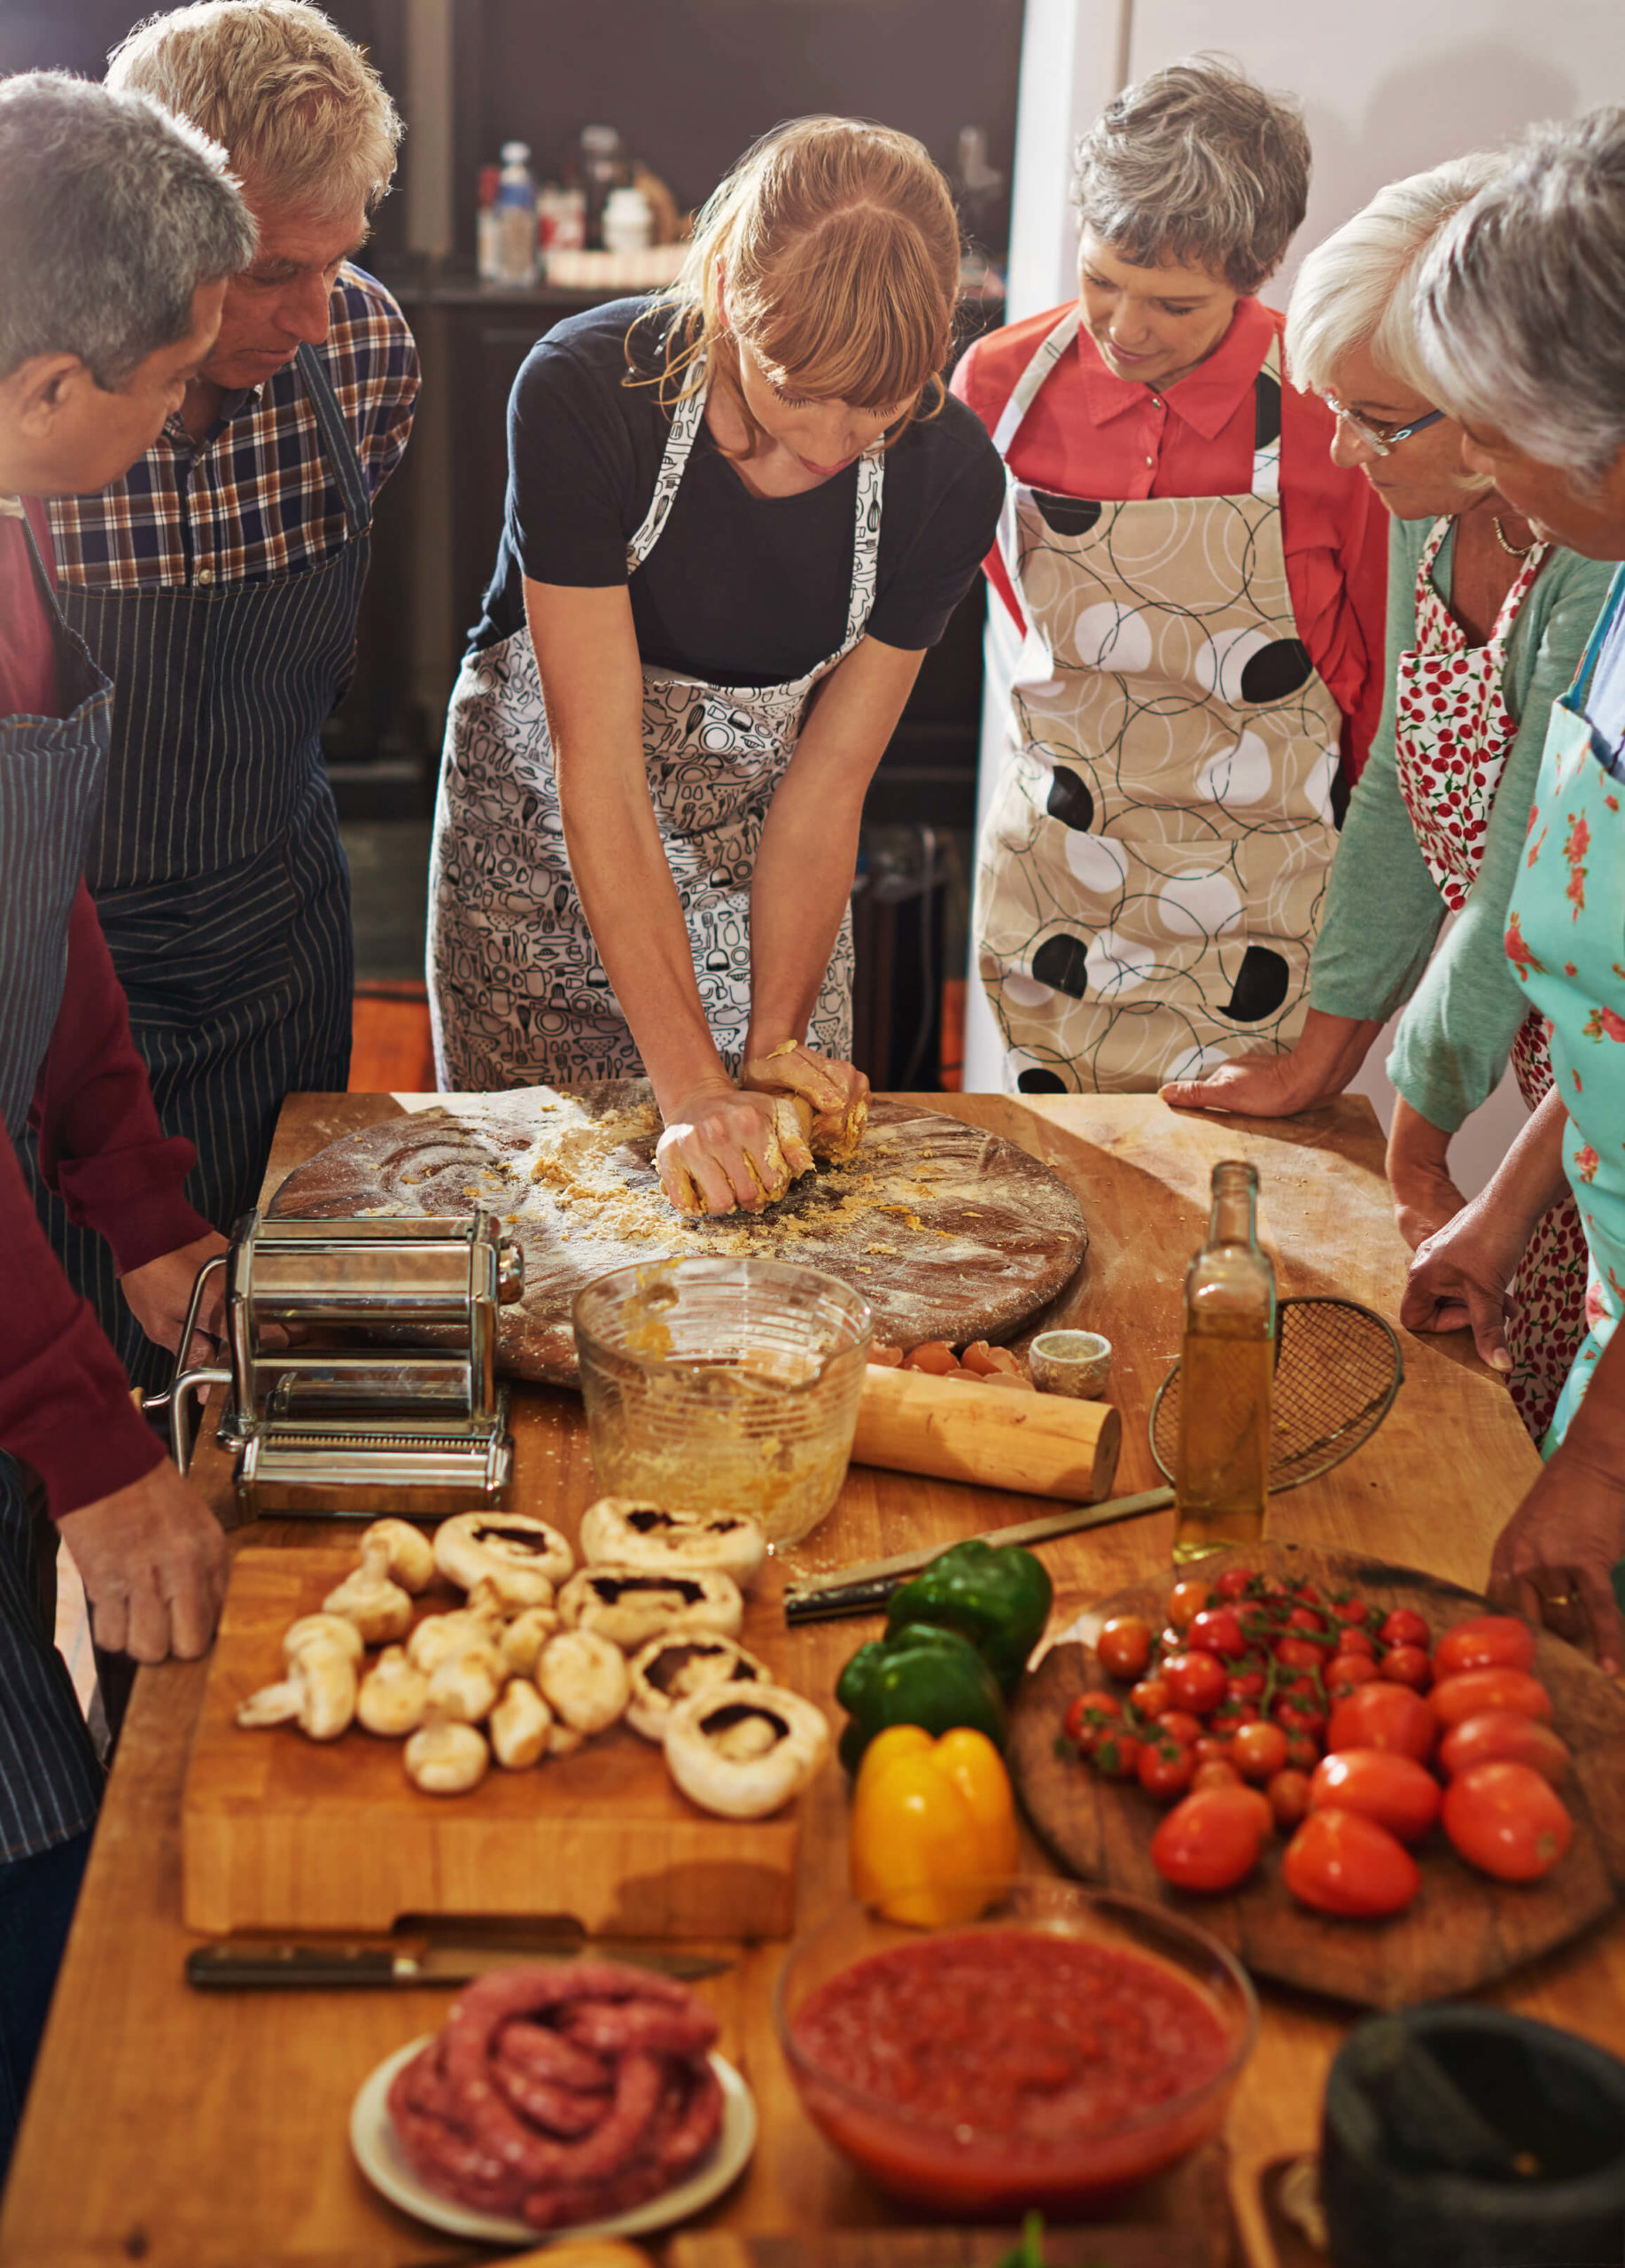 Residents learning to cook healthy meals with an instructor in a spacious kitchen.